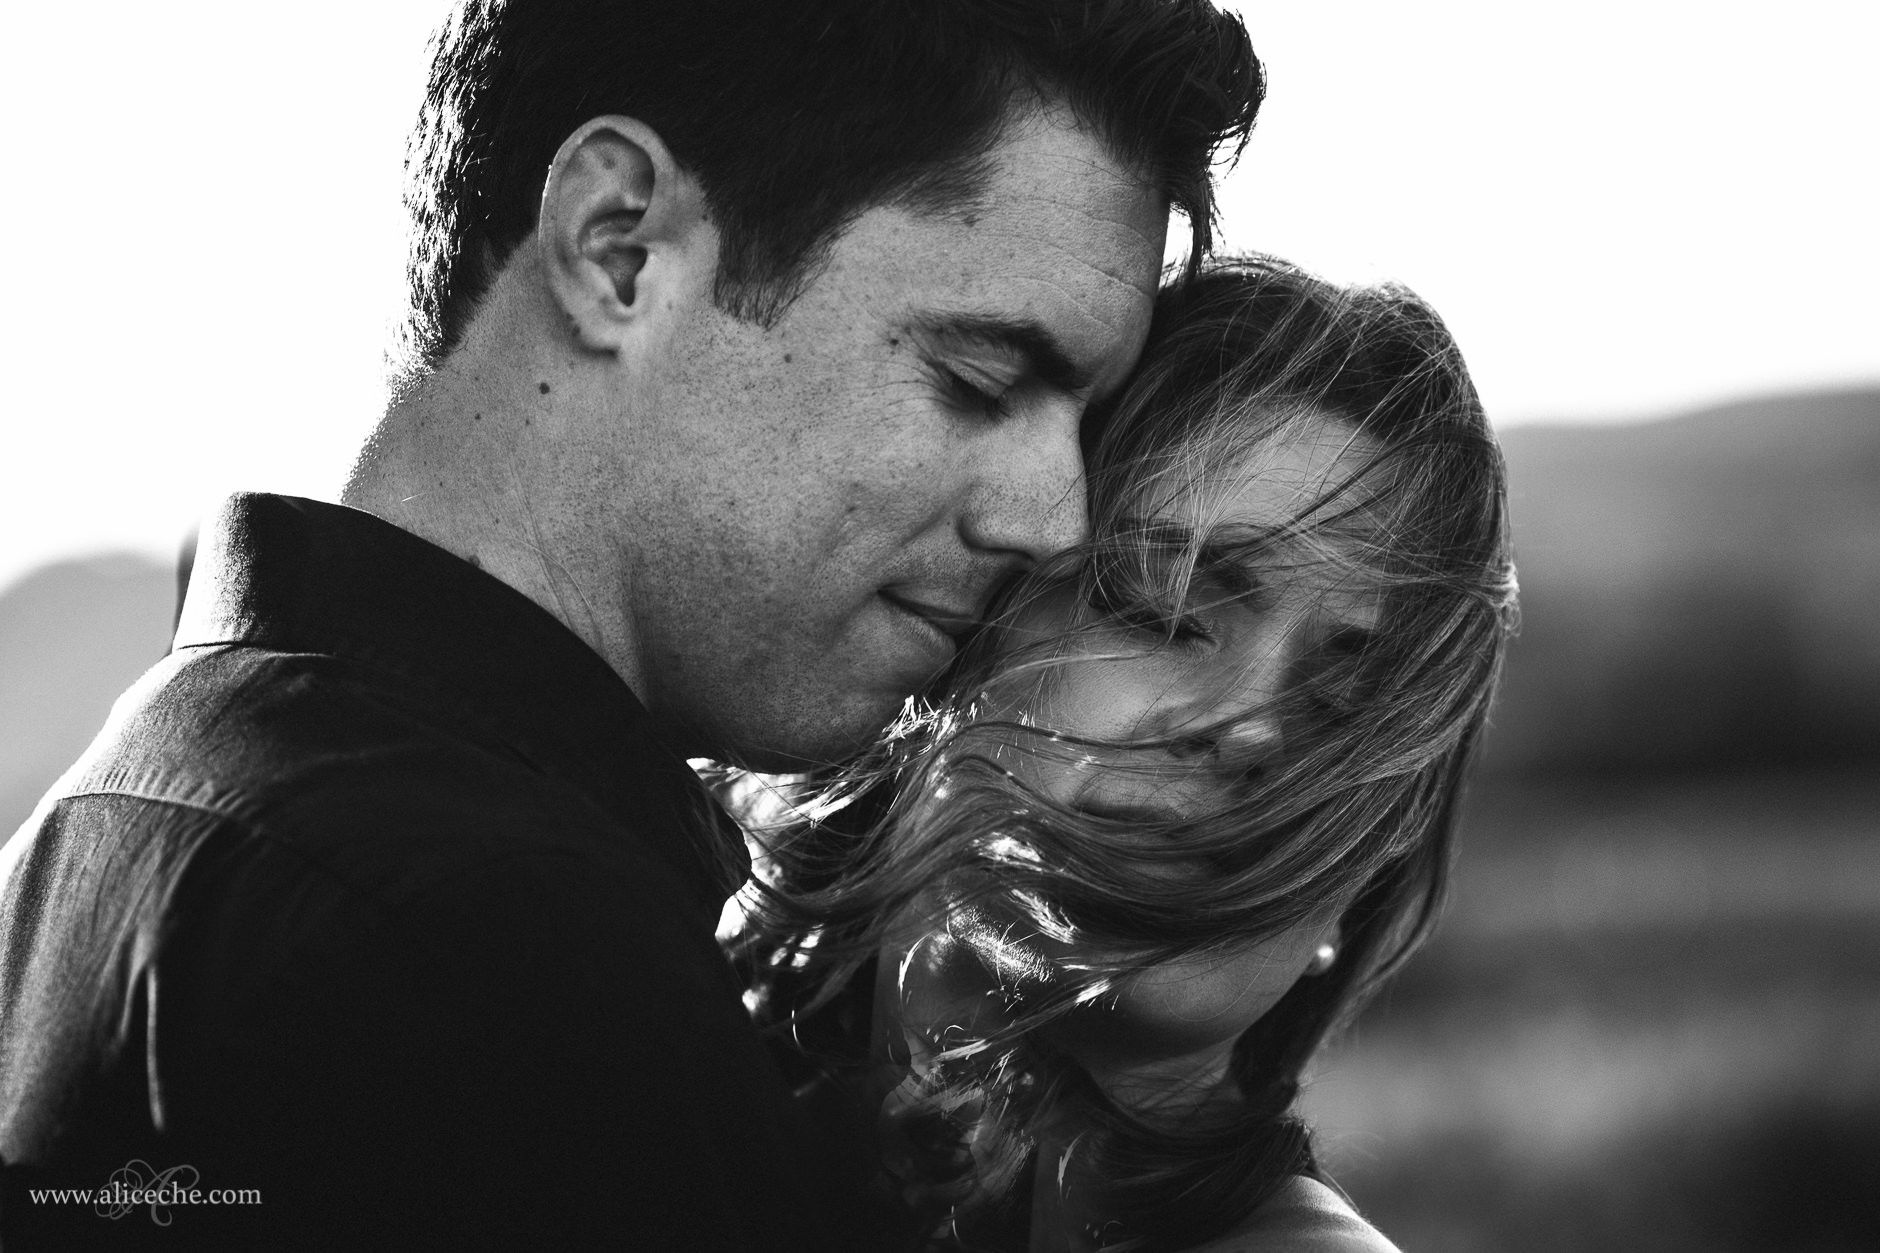 alice-che-photography-destination-wedding-photographer-black-and-white-couple-wind-in-hair